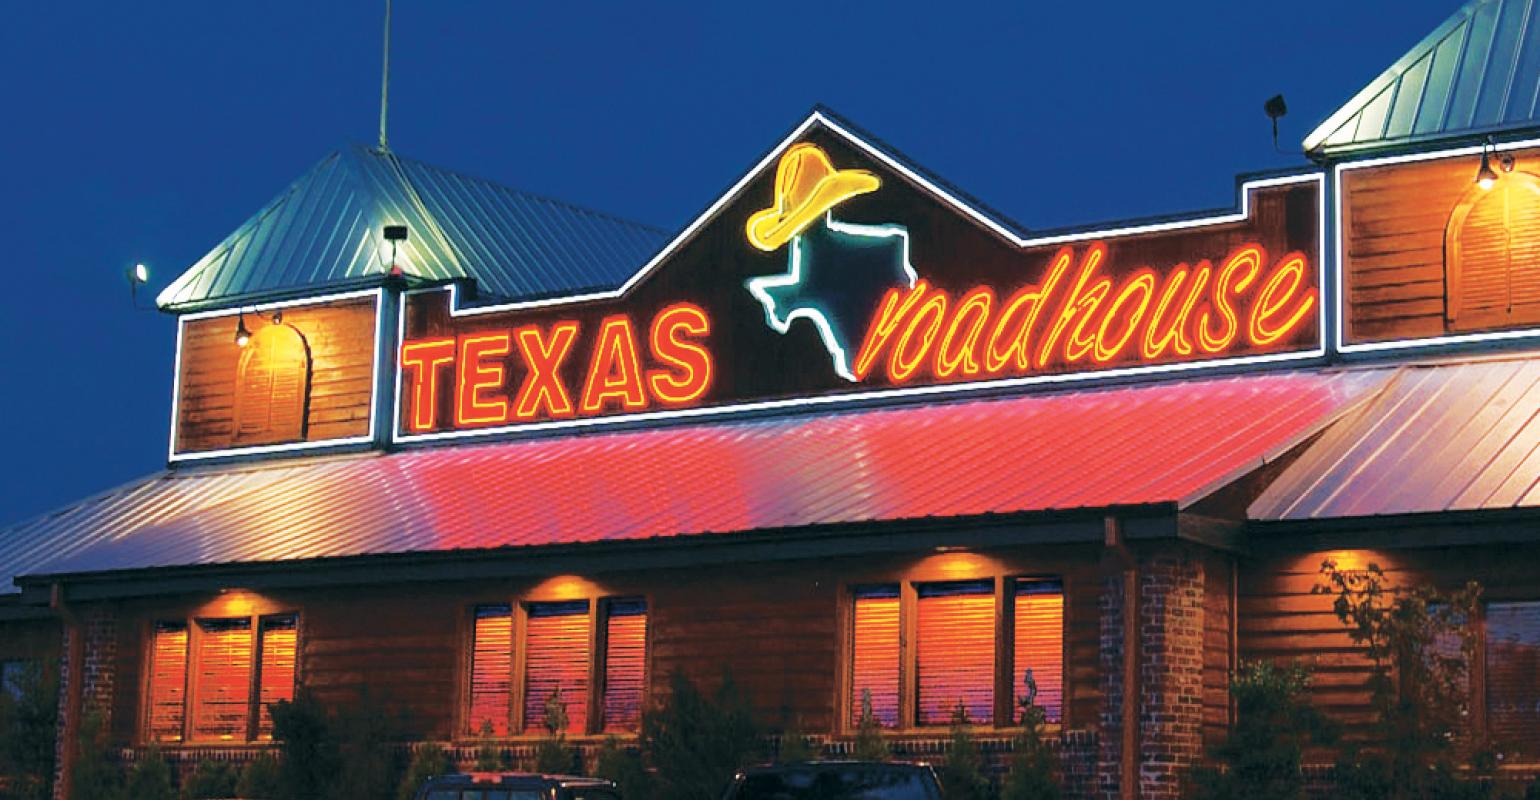 Jerry Morgan named president of Texas Roadhouse.